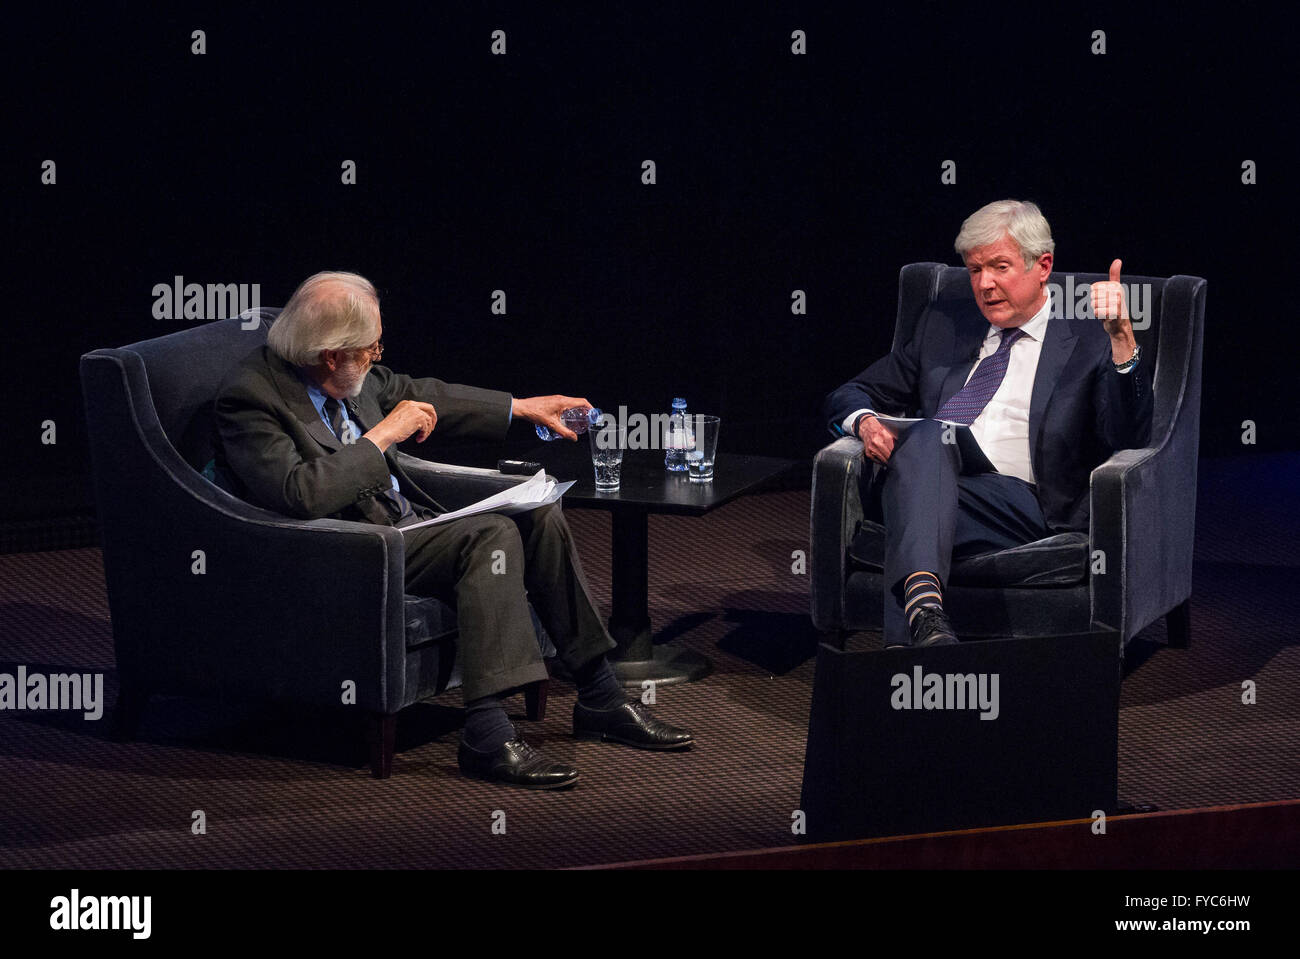 Tony Hall, Director General of the BBC, in conversation with Lord Puttnam. Stock Photo